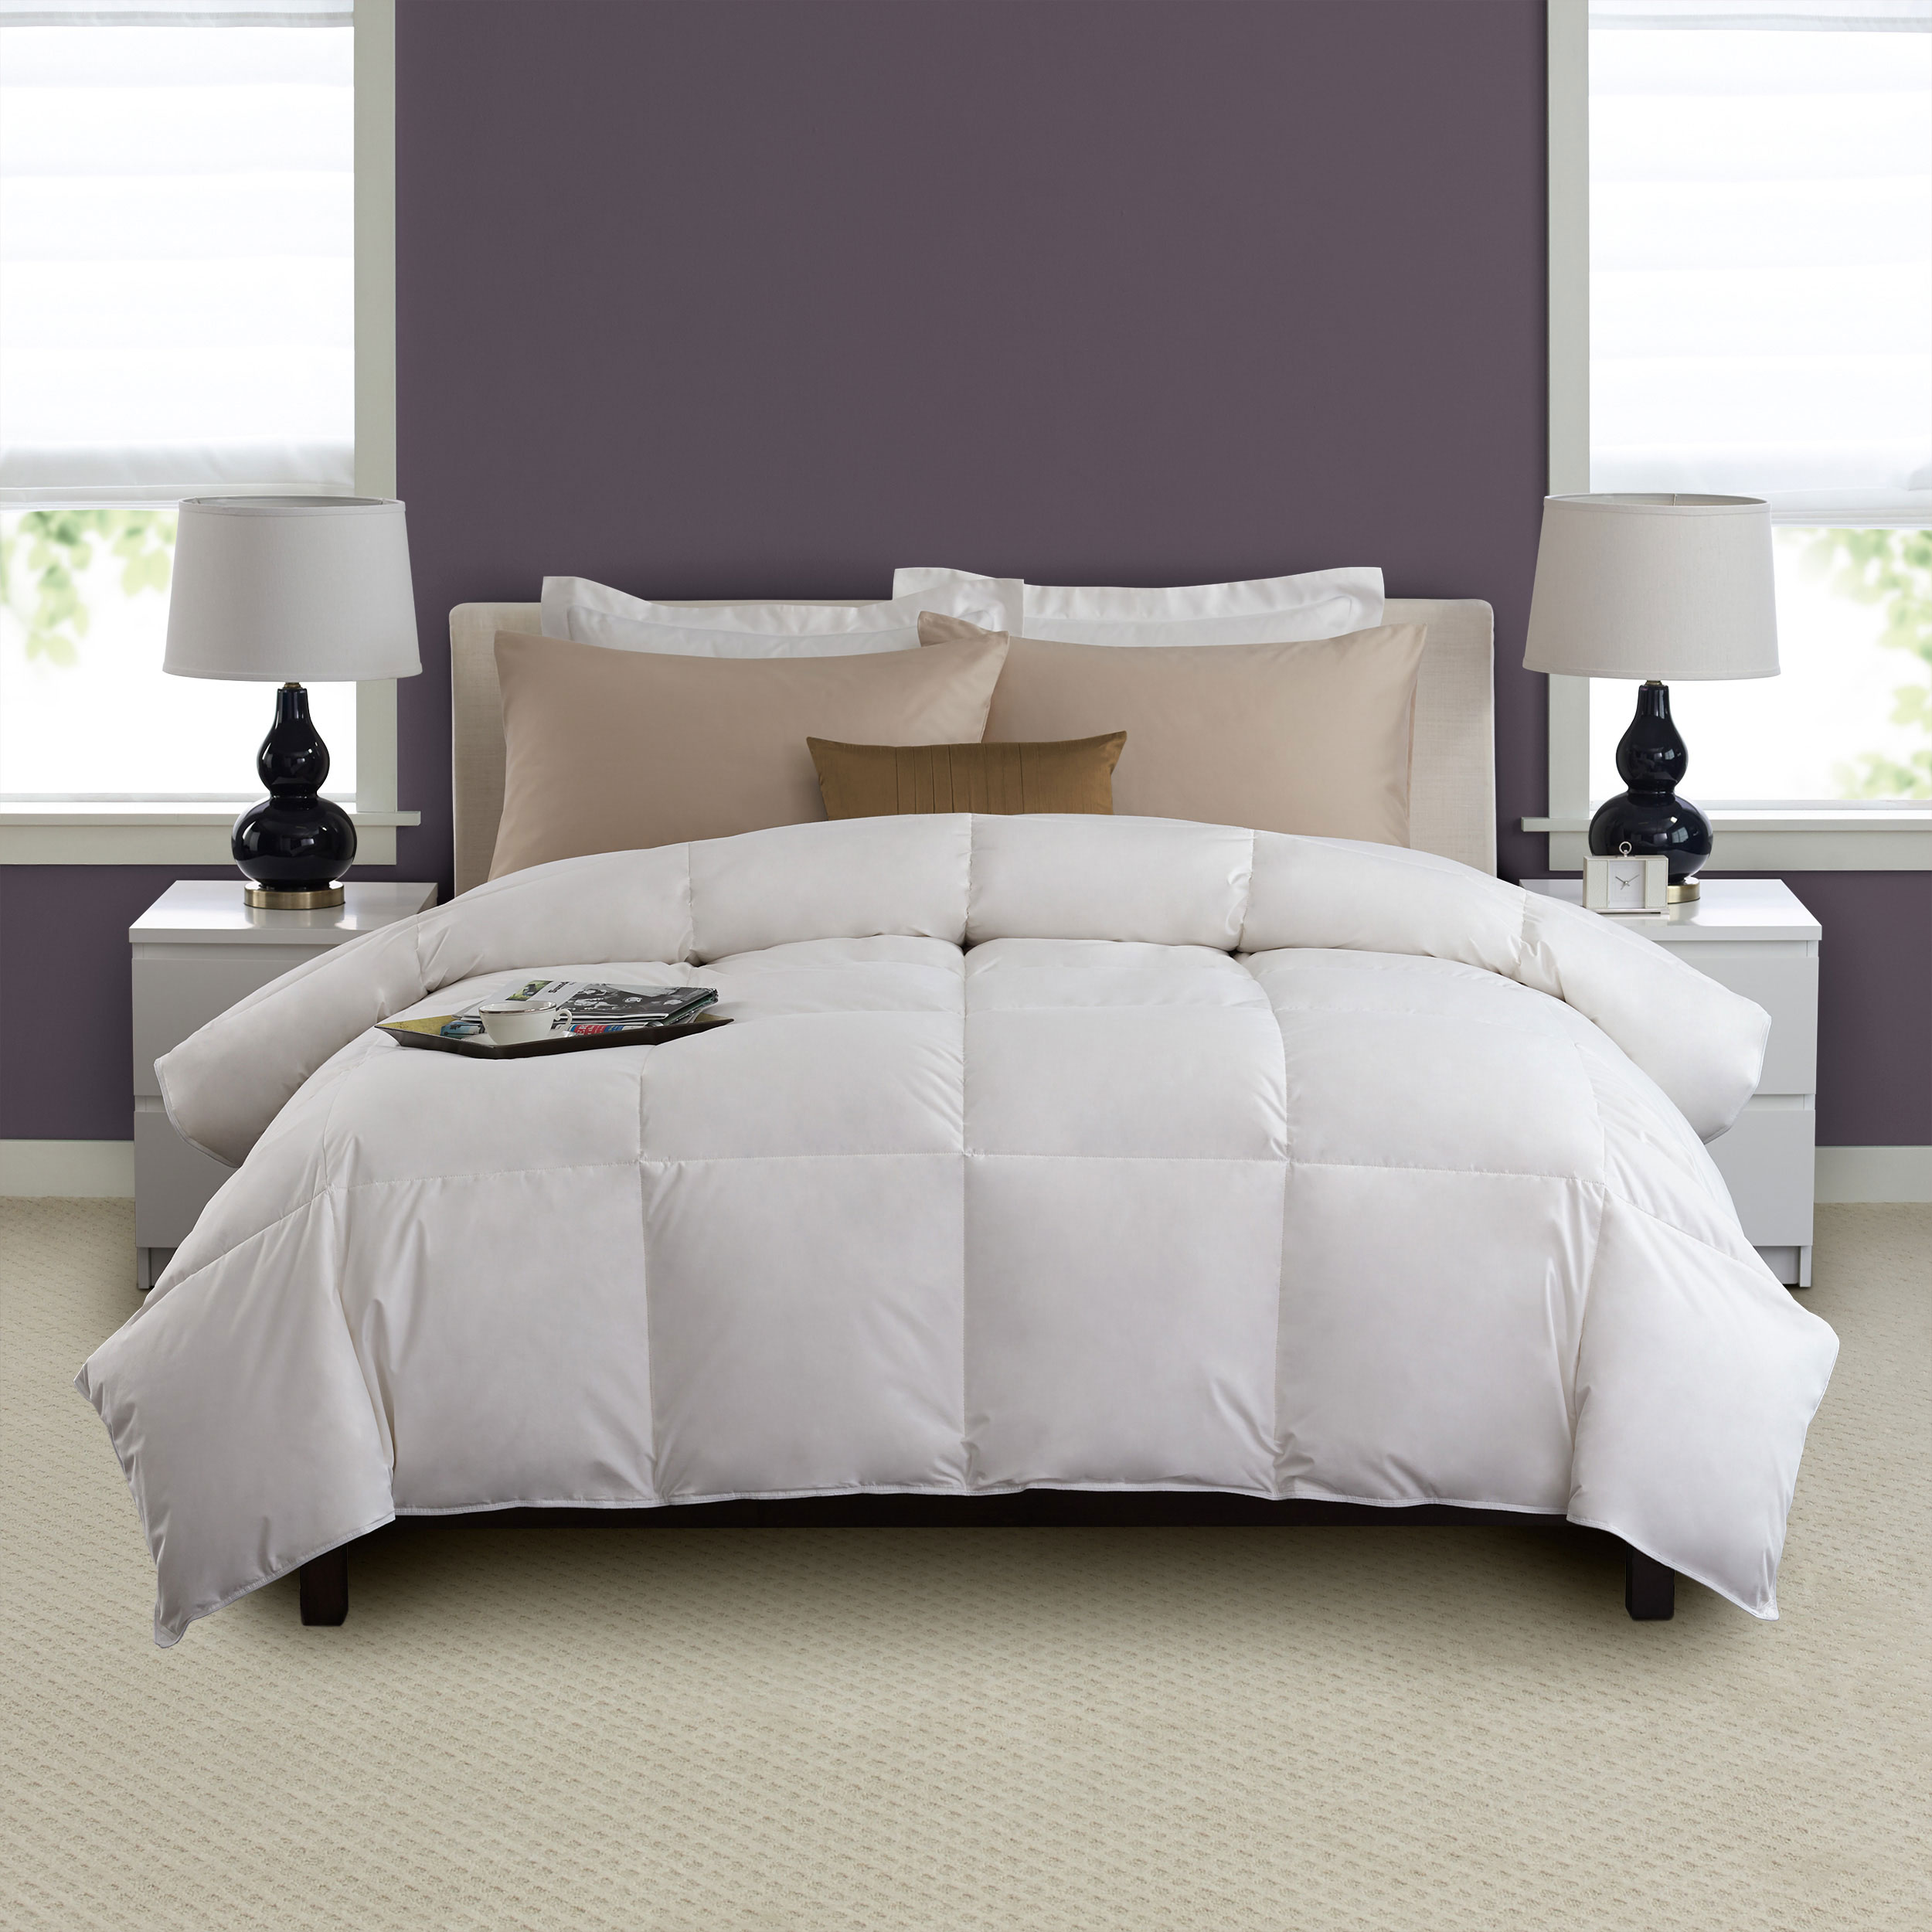 Pacific Coast Hotel Down Comforter 230 Thread Count 550 Fill Power Down - Twin